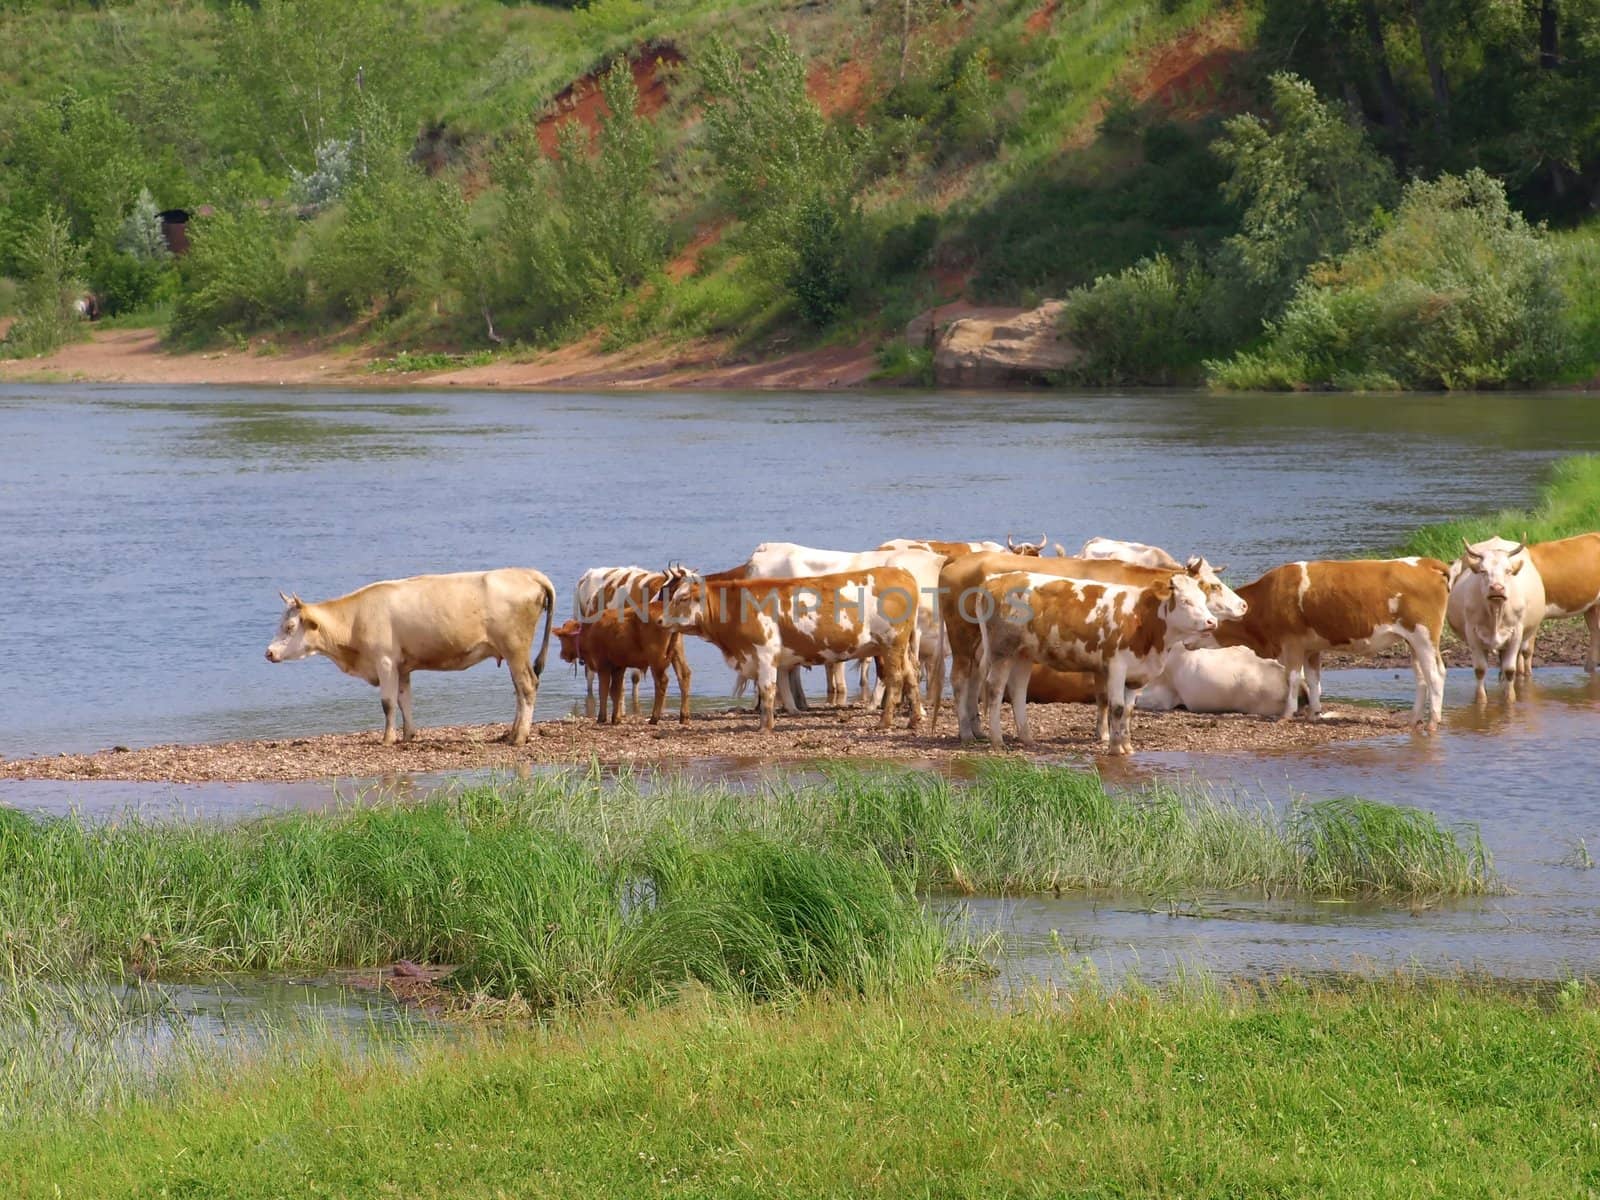 Cows on the river. Summer nature.